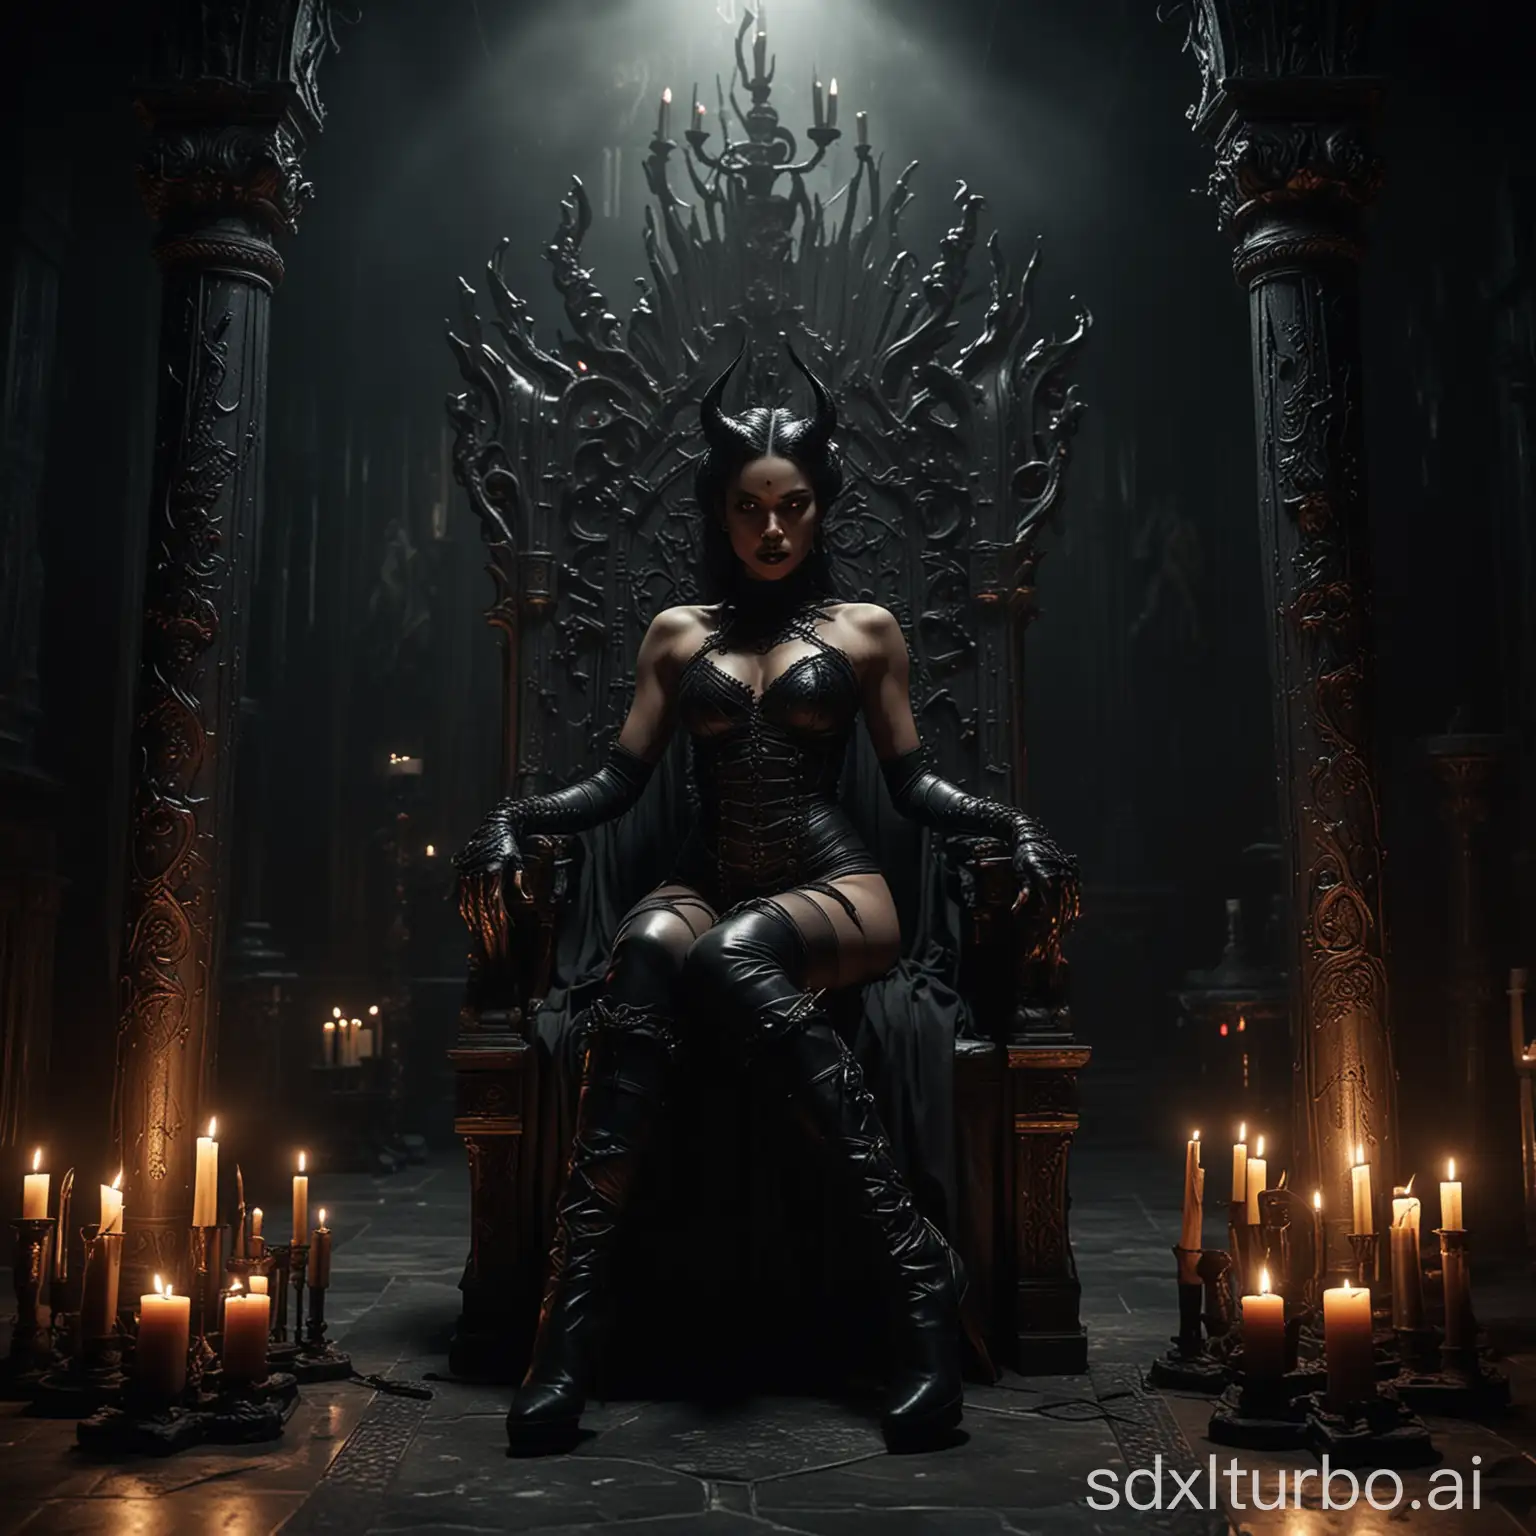 In the depths of an eerie chamber, a captivating high-quality cinematic photo captures a seductive black demon woman , adorned with sinister-looking high-heeled boots, sitting majestically on an intricately carved black throne. Her dark beauty is accentuated by her glowing, which pierces the surrounding darkness. The flickering glow of black candles casts haunting shadows across the chamber, adding to the chilling atmosphere. The demonic woman's poise and commanding presence dominate the scene, exuding an intense power and darkness that leaves an indelible impression on all who behold her., cinematic, photo
